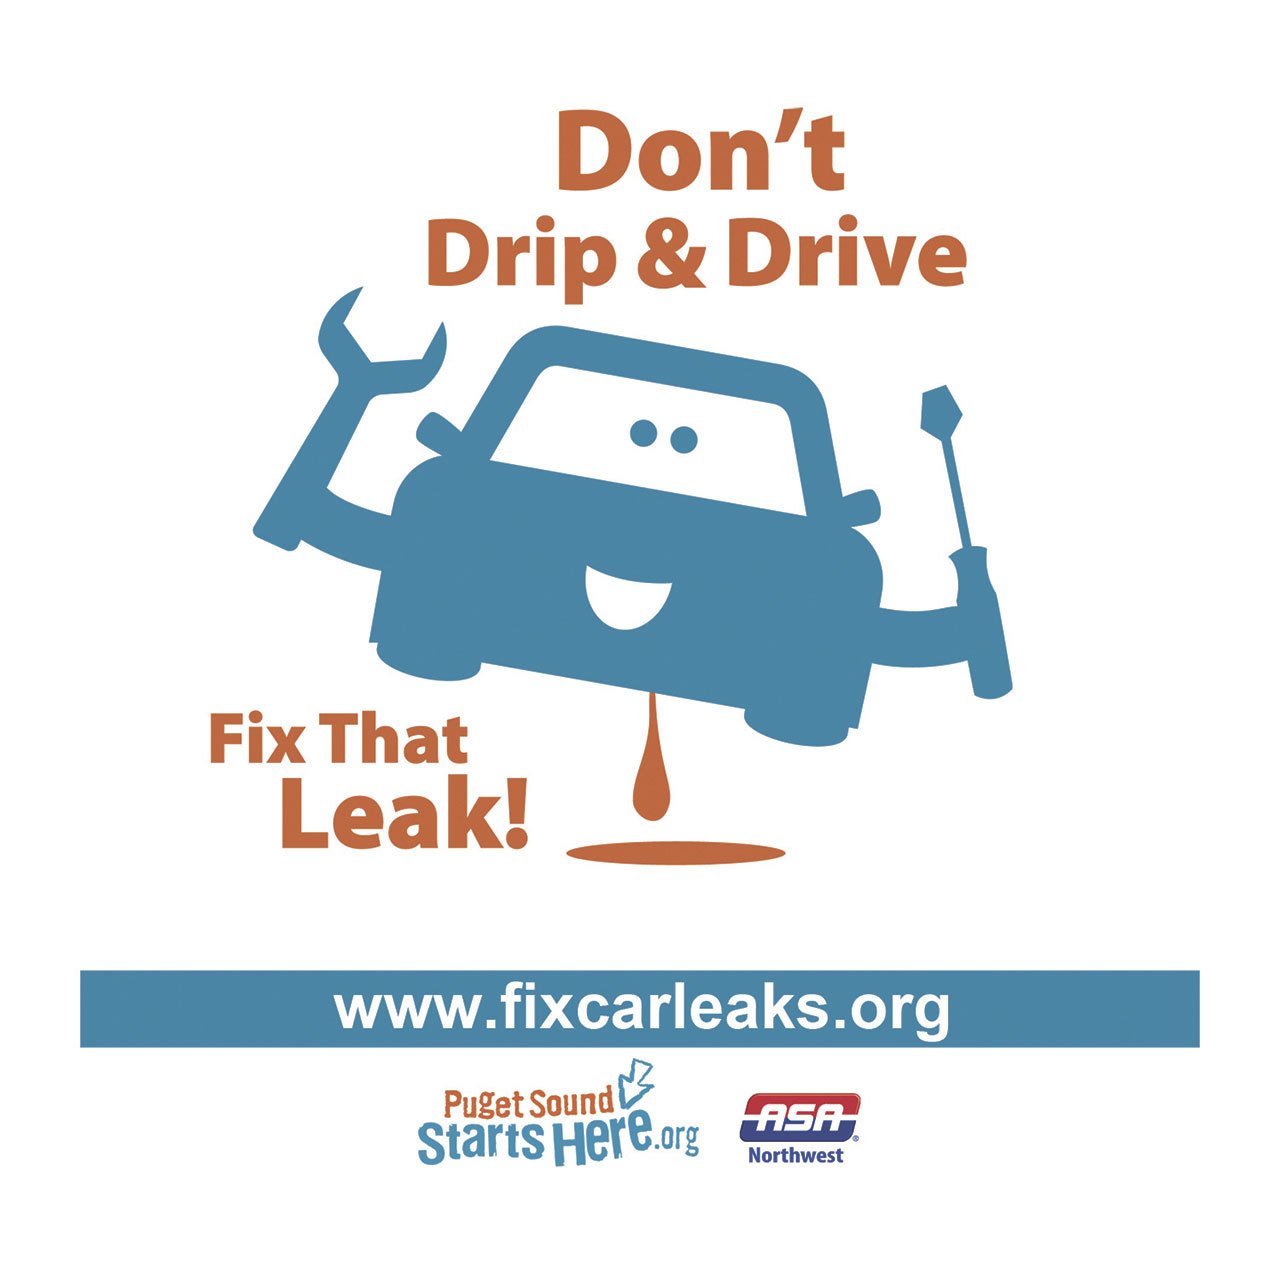 Don’t Drip & Drive program returns to help local drivers and Puget Sound